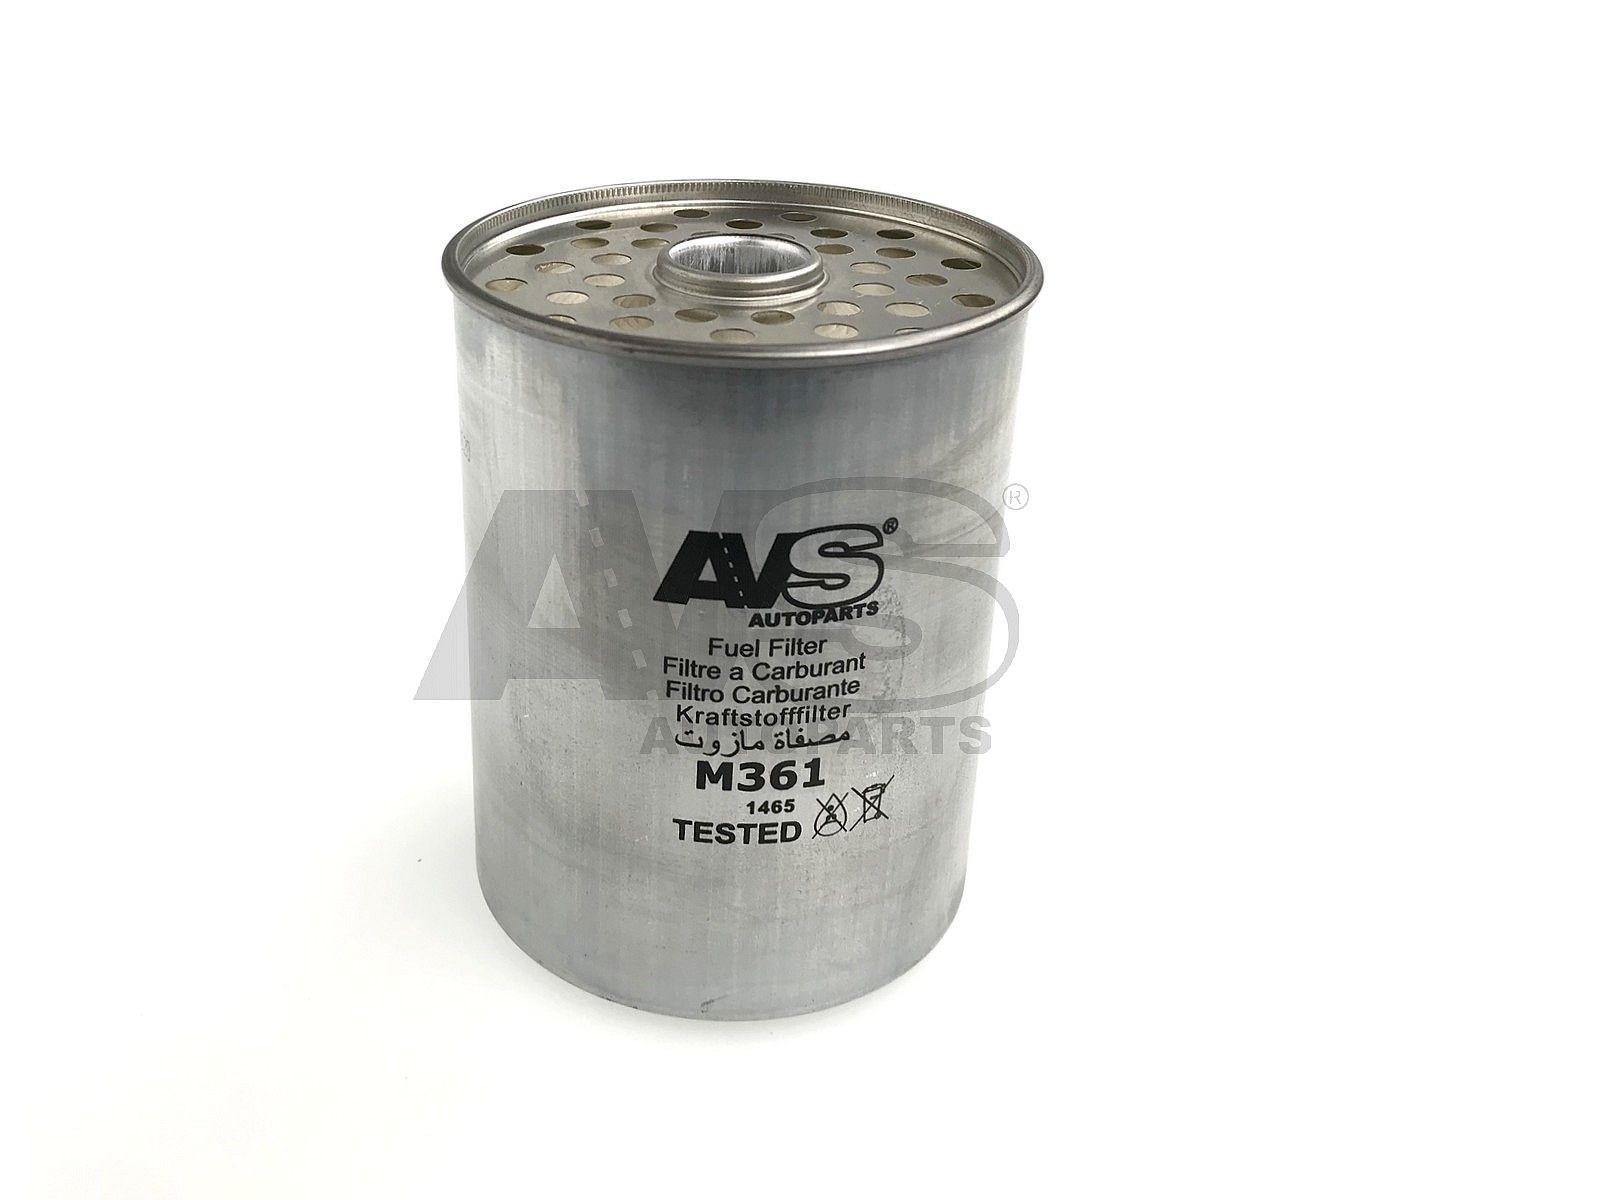 M361 Inline fuel filter AVS AUTOPARTS M361 review and test